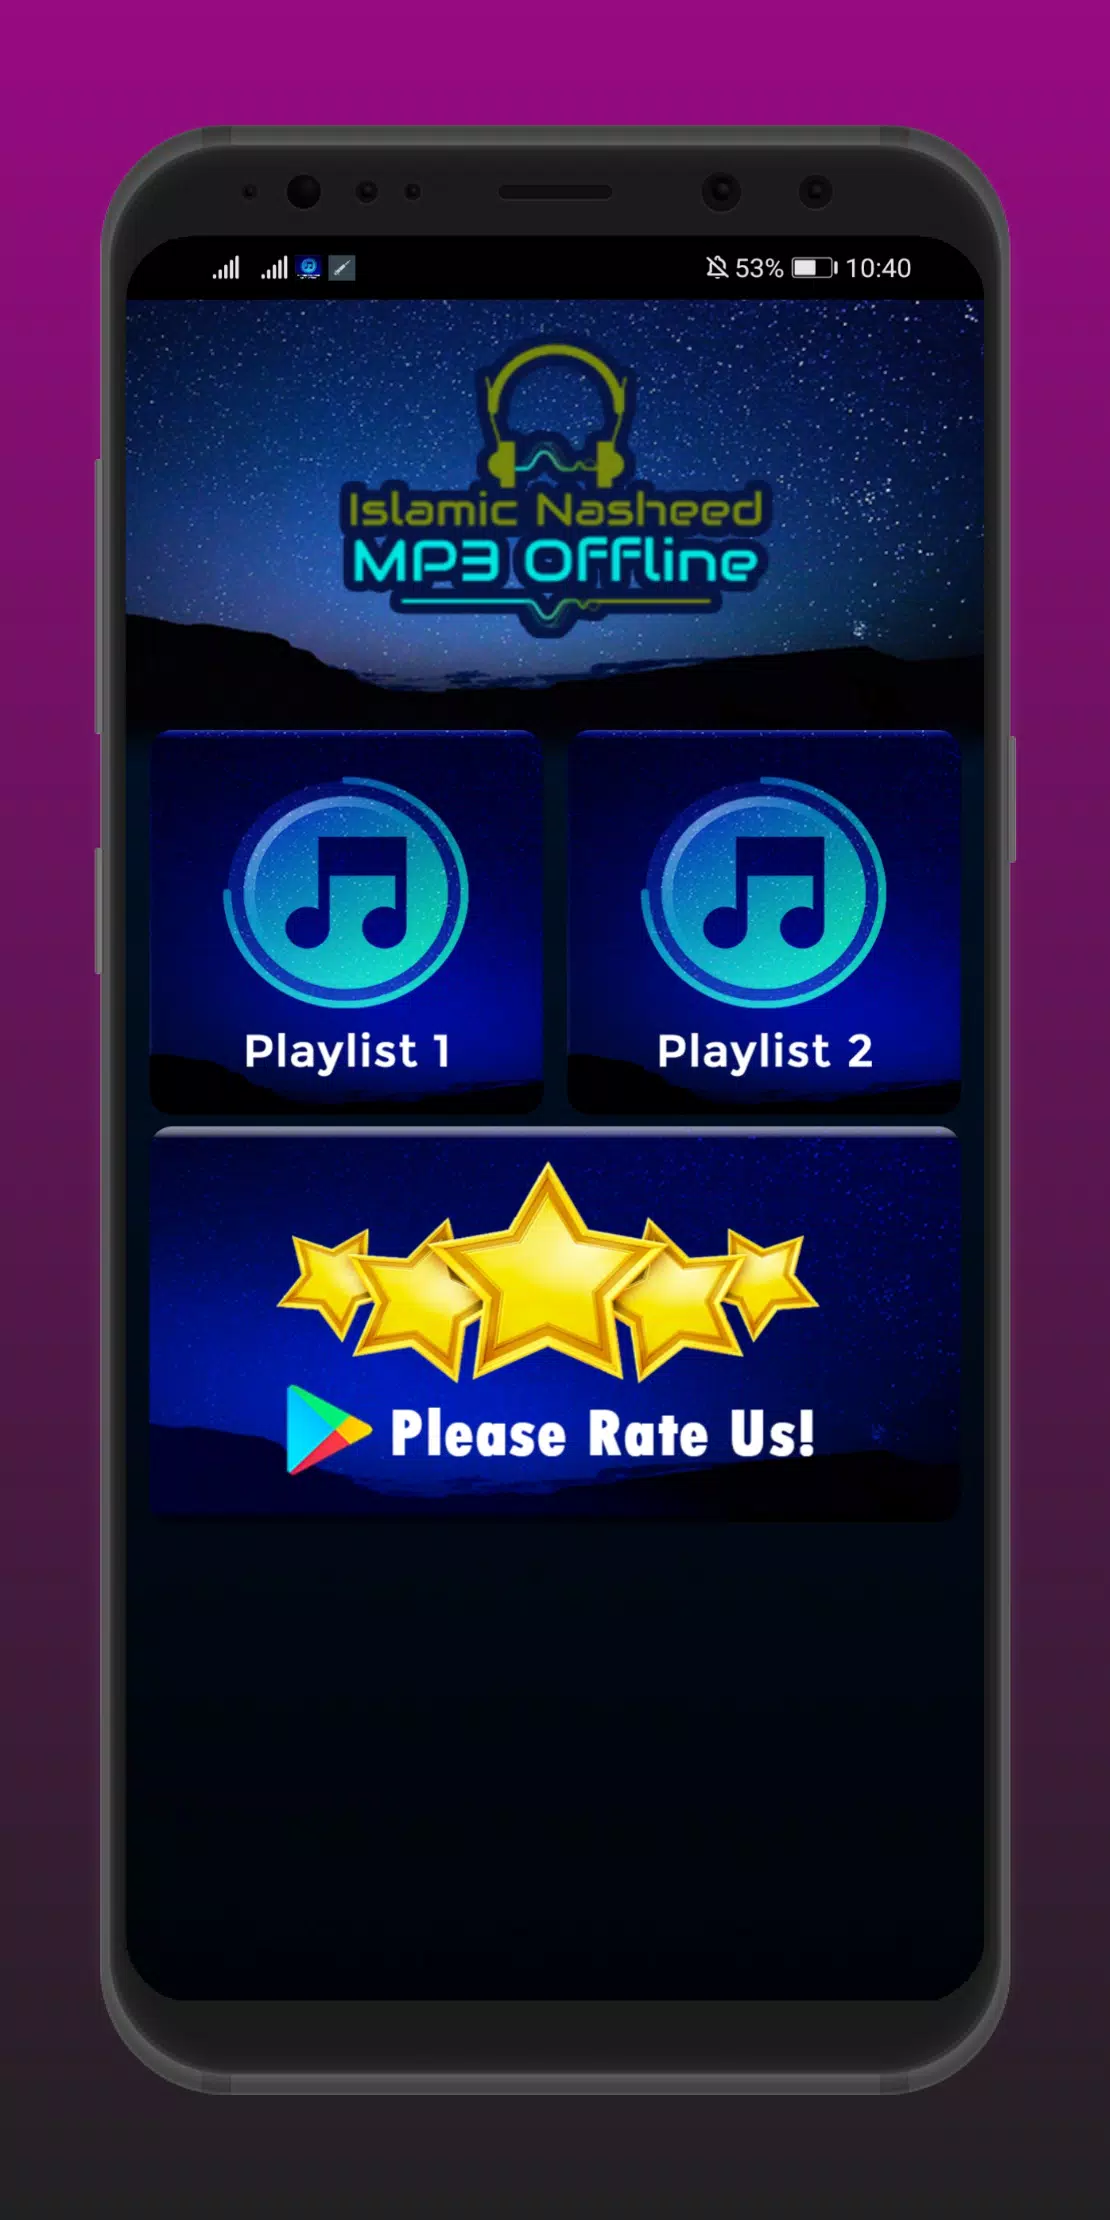 Islamic Nasheed MP3 Offline APK for Android Download